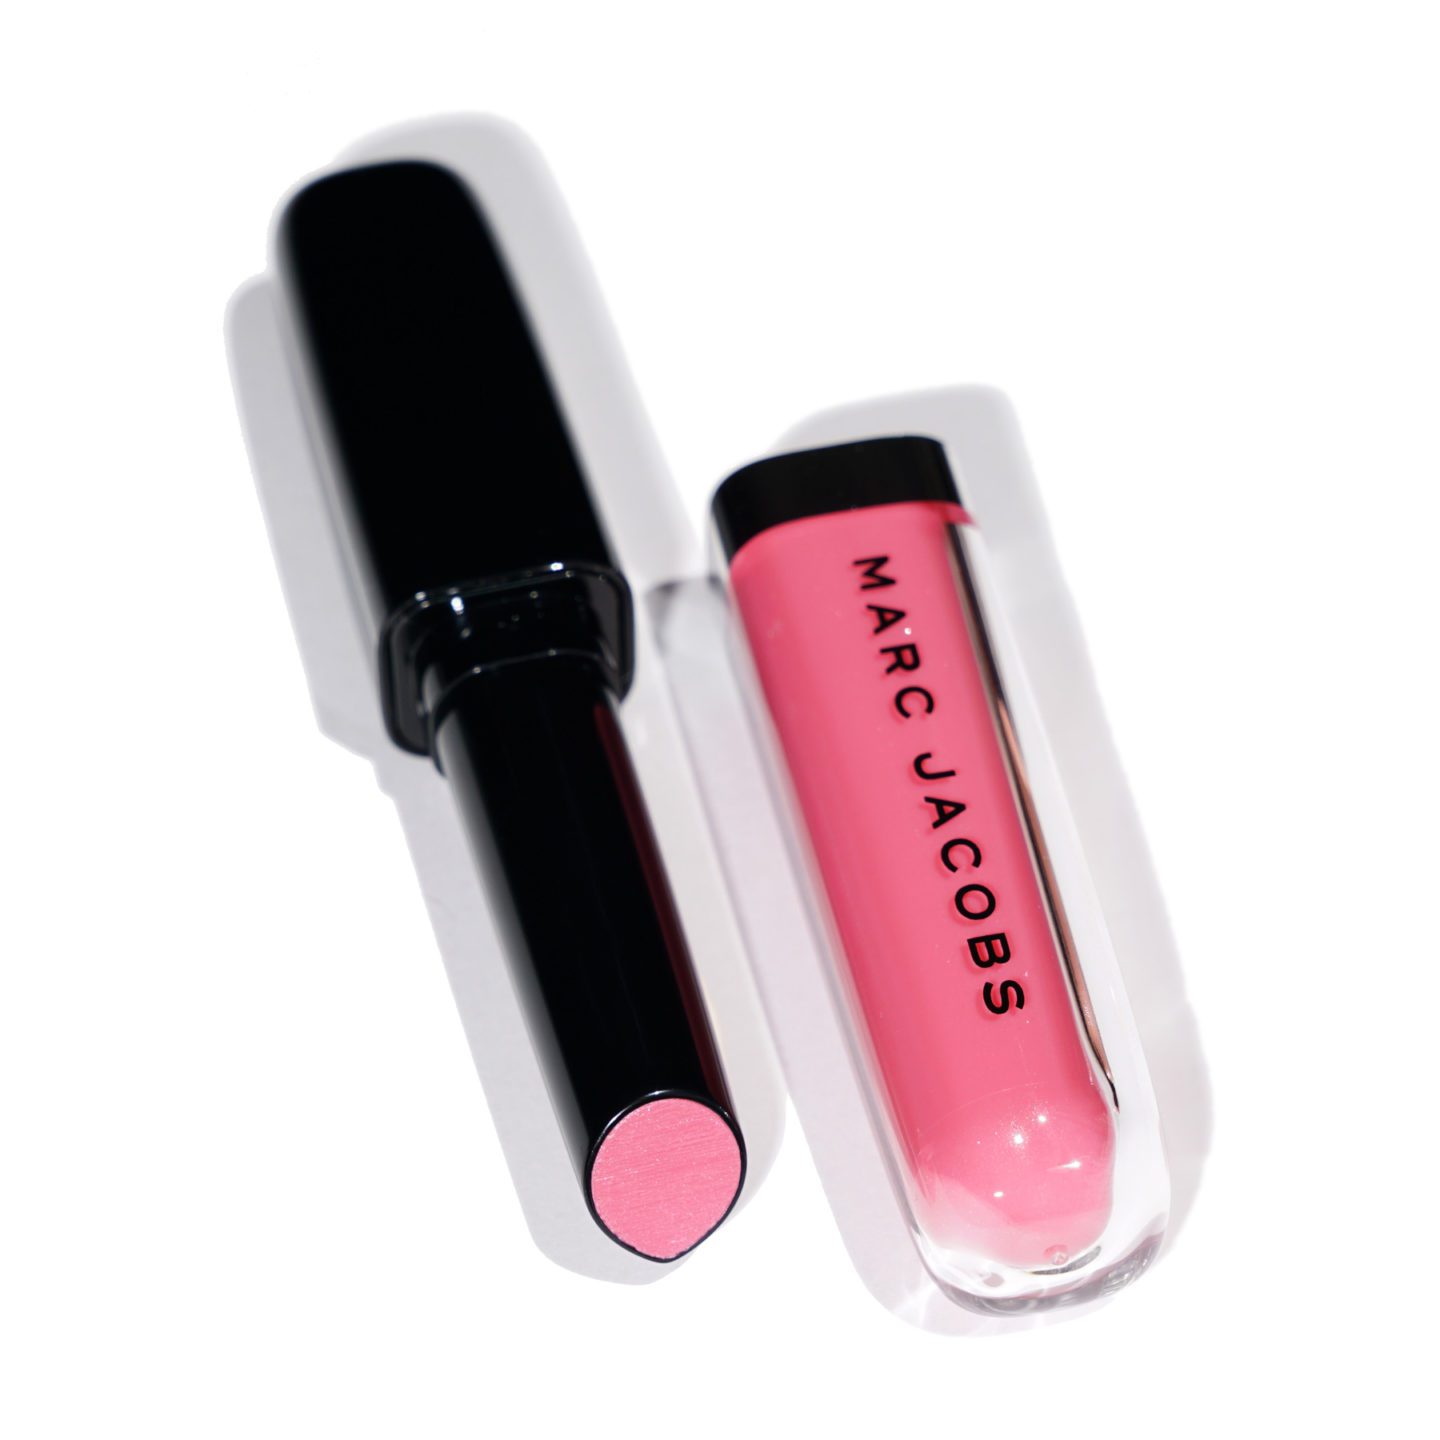 Marc Jacobs Beauty Enamored Hydrating Lip Gloss Stick review Sweet Escape | The Beauty Look Book